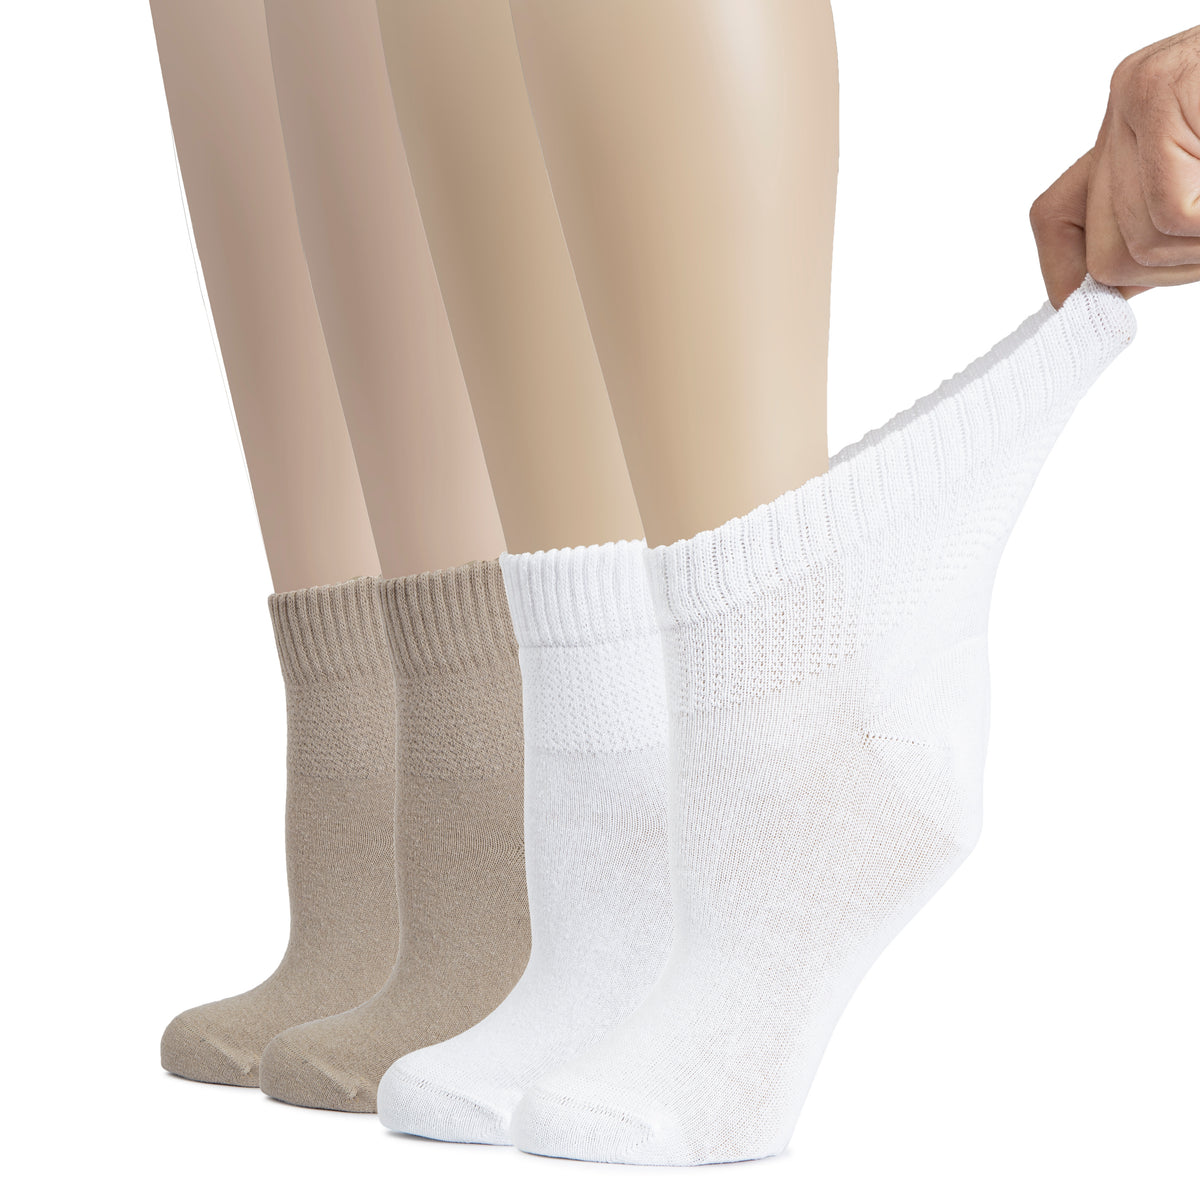 Hugh Ugoli Cotton Diabetic Women's Socks, Ankle Height, Loose, Wide Stretchy, Thin, Seamless Toe and Non-Binding Top, 4 Pairs | Shoe Size: 6-9 | LightGrey / White